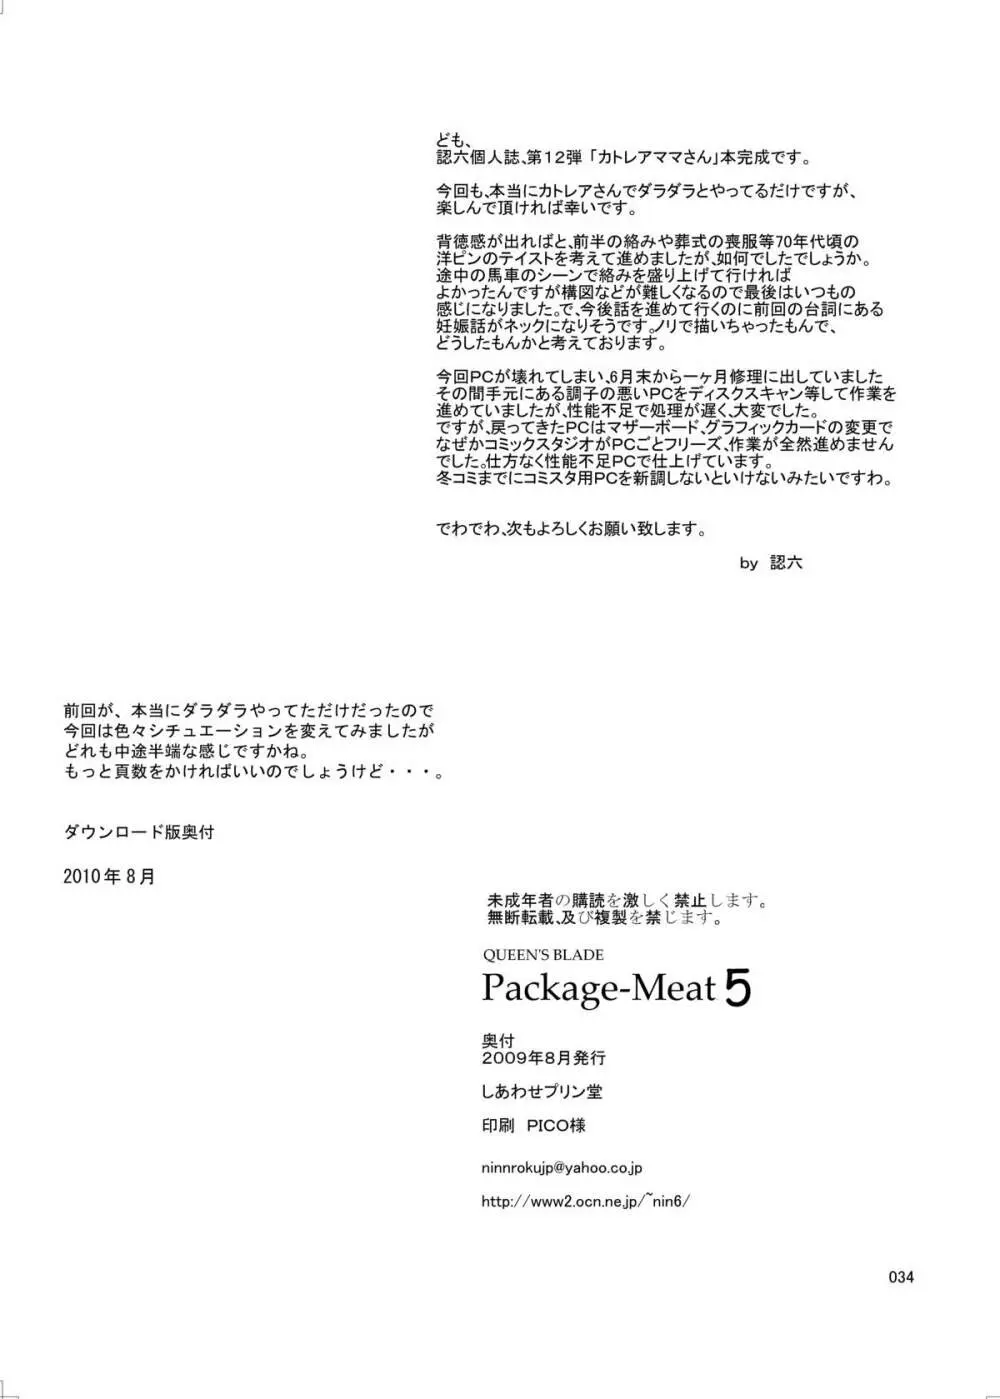 Package-Meat 5 34ページ